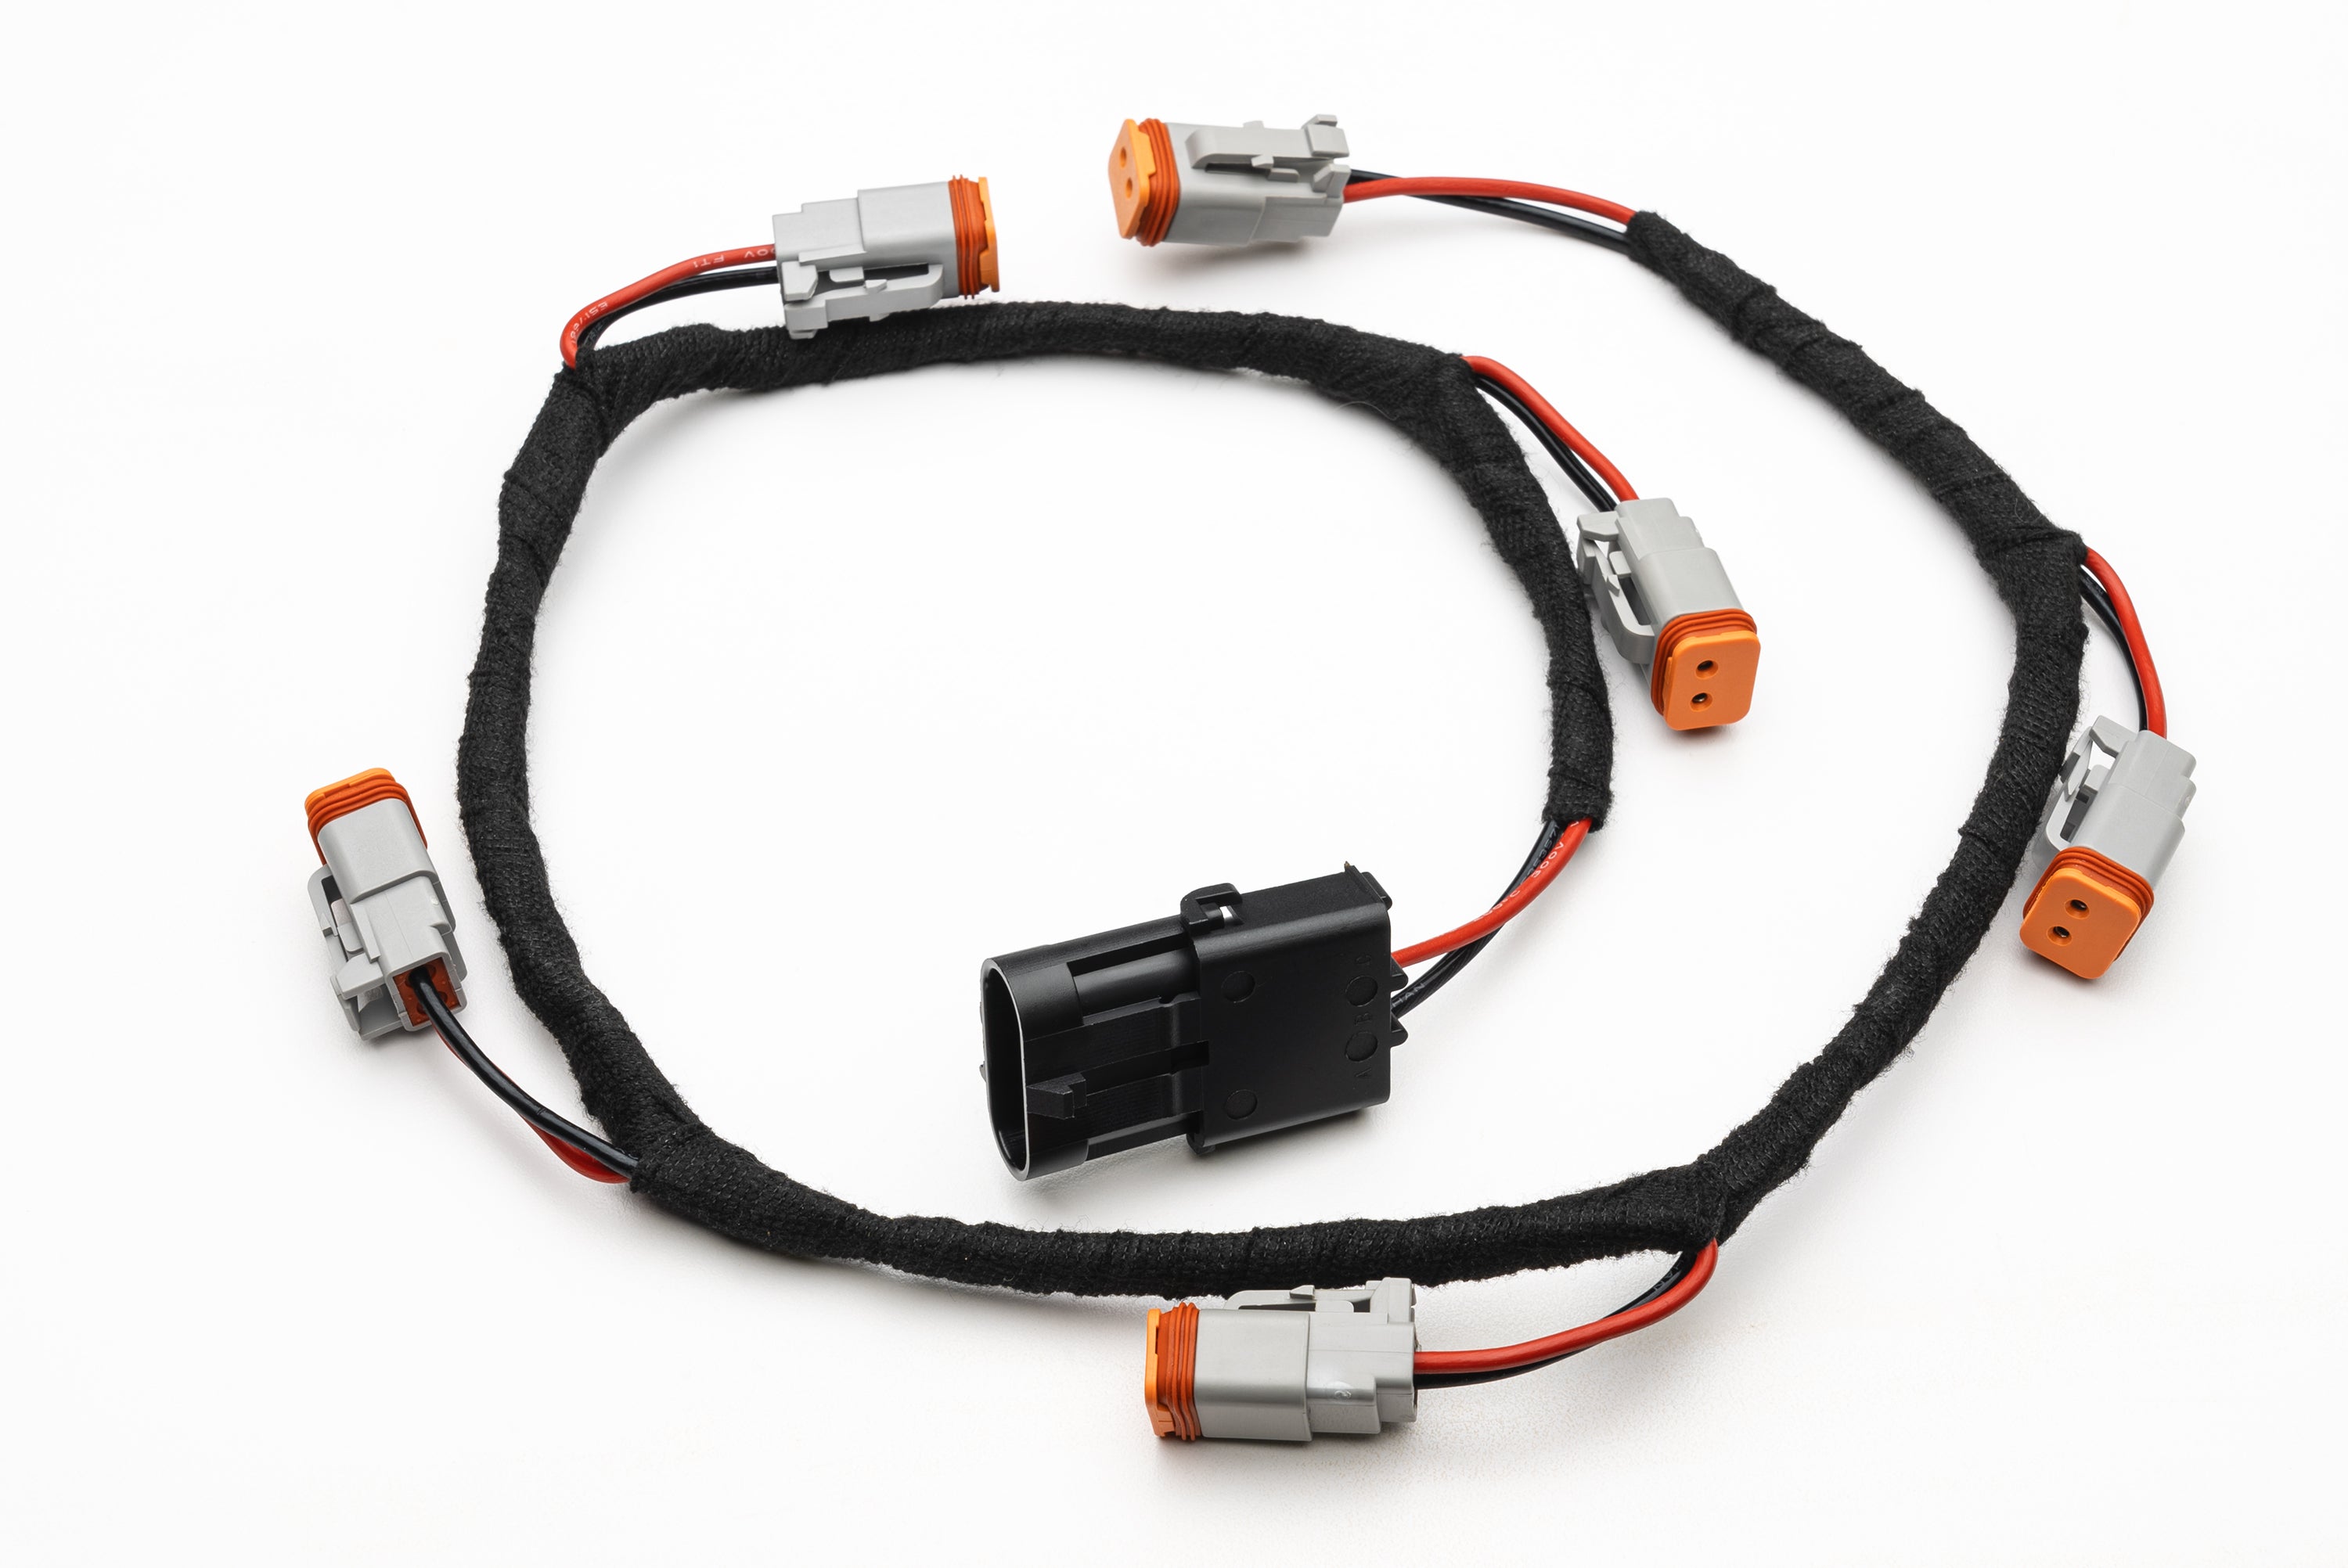 6X 2 Pole DT Connector Harness Splitter add on - SPV Harness System (Works with MANY vehicles, See Details)